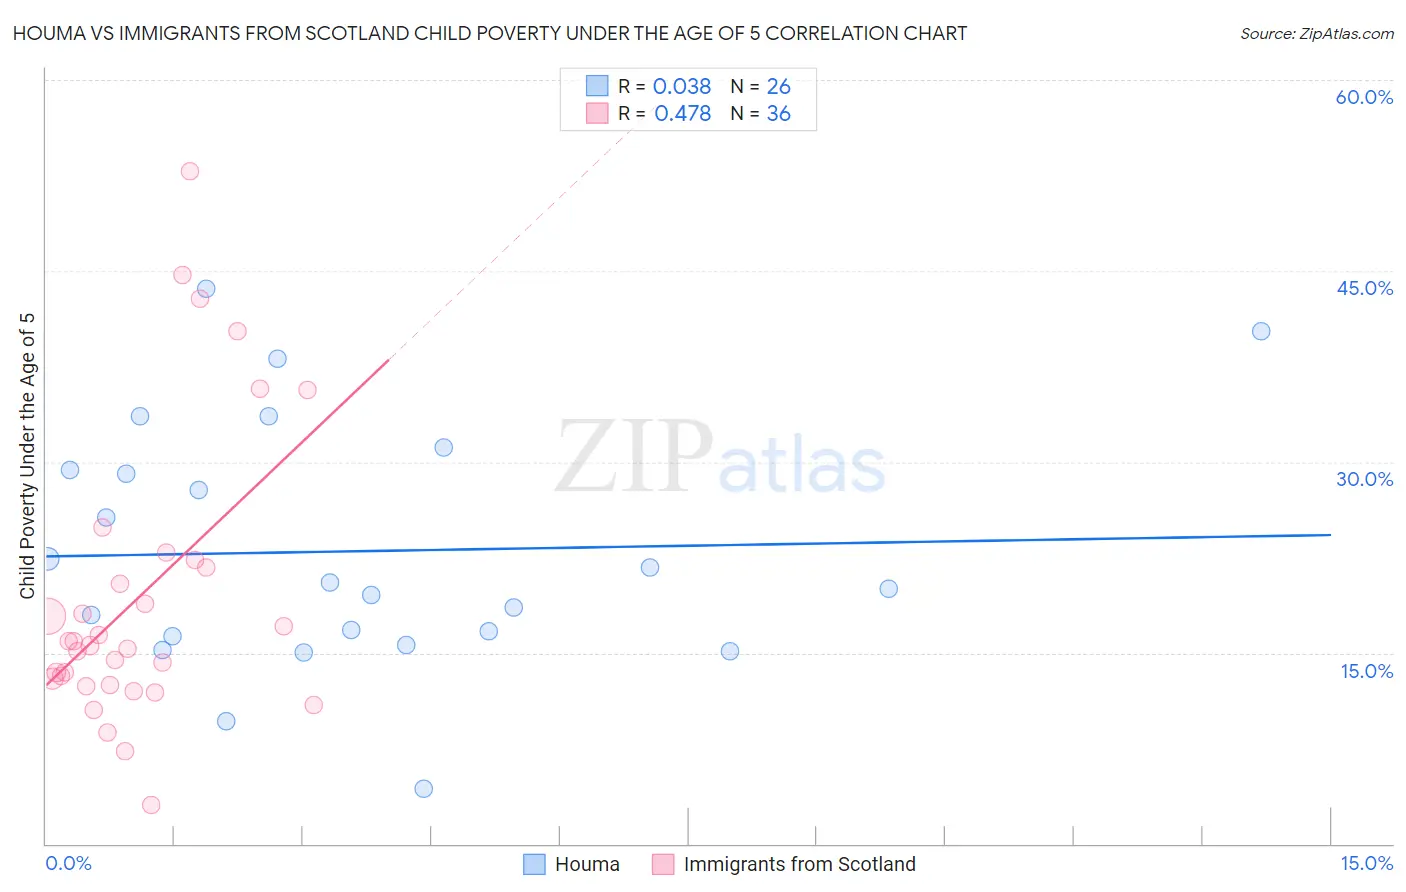 Houma vs Immigrants from Scotland Child Poverty Under the Age of 5